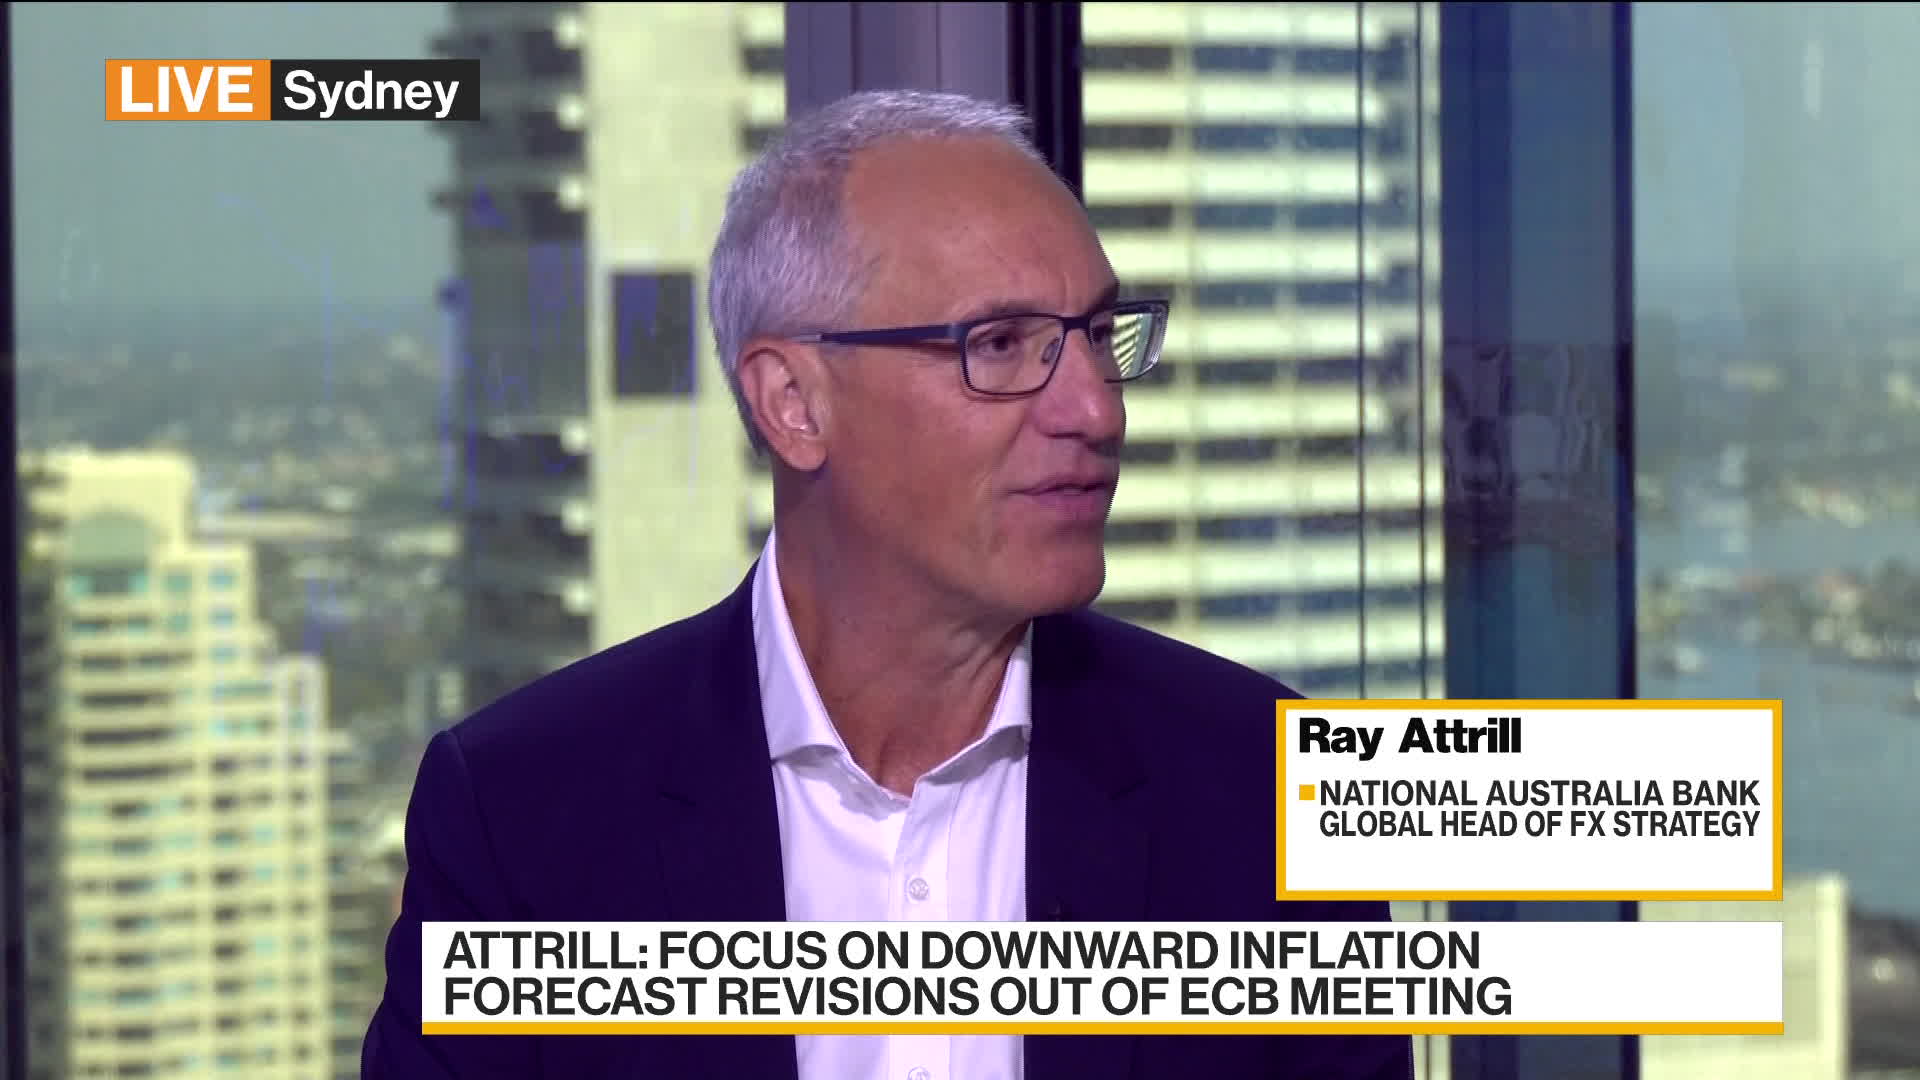 Watch NAB's Attrill on G10 FX Outlook – Bloomberg